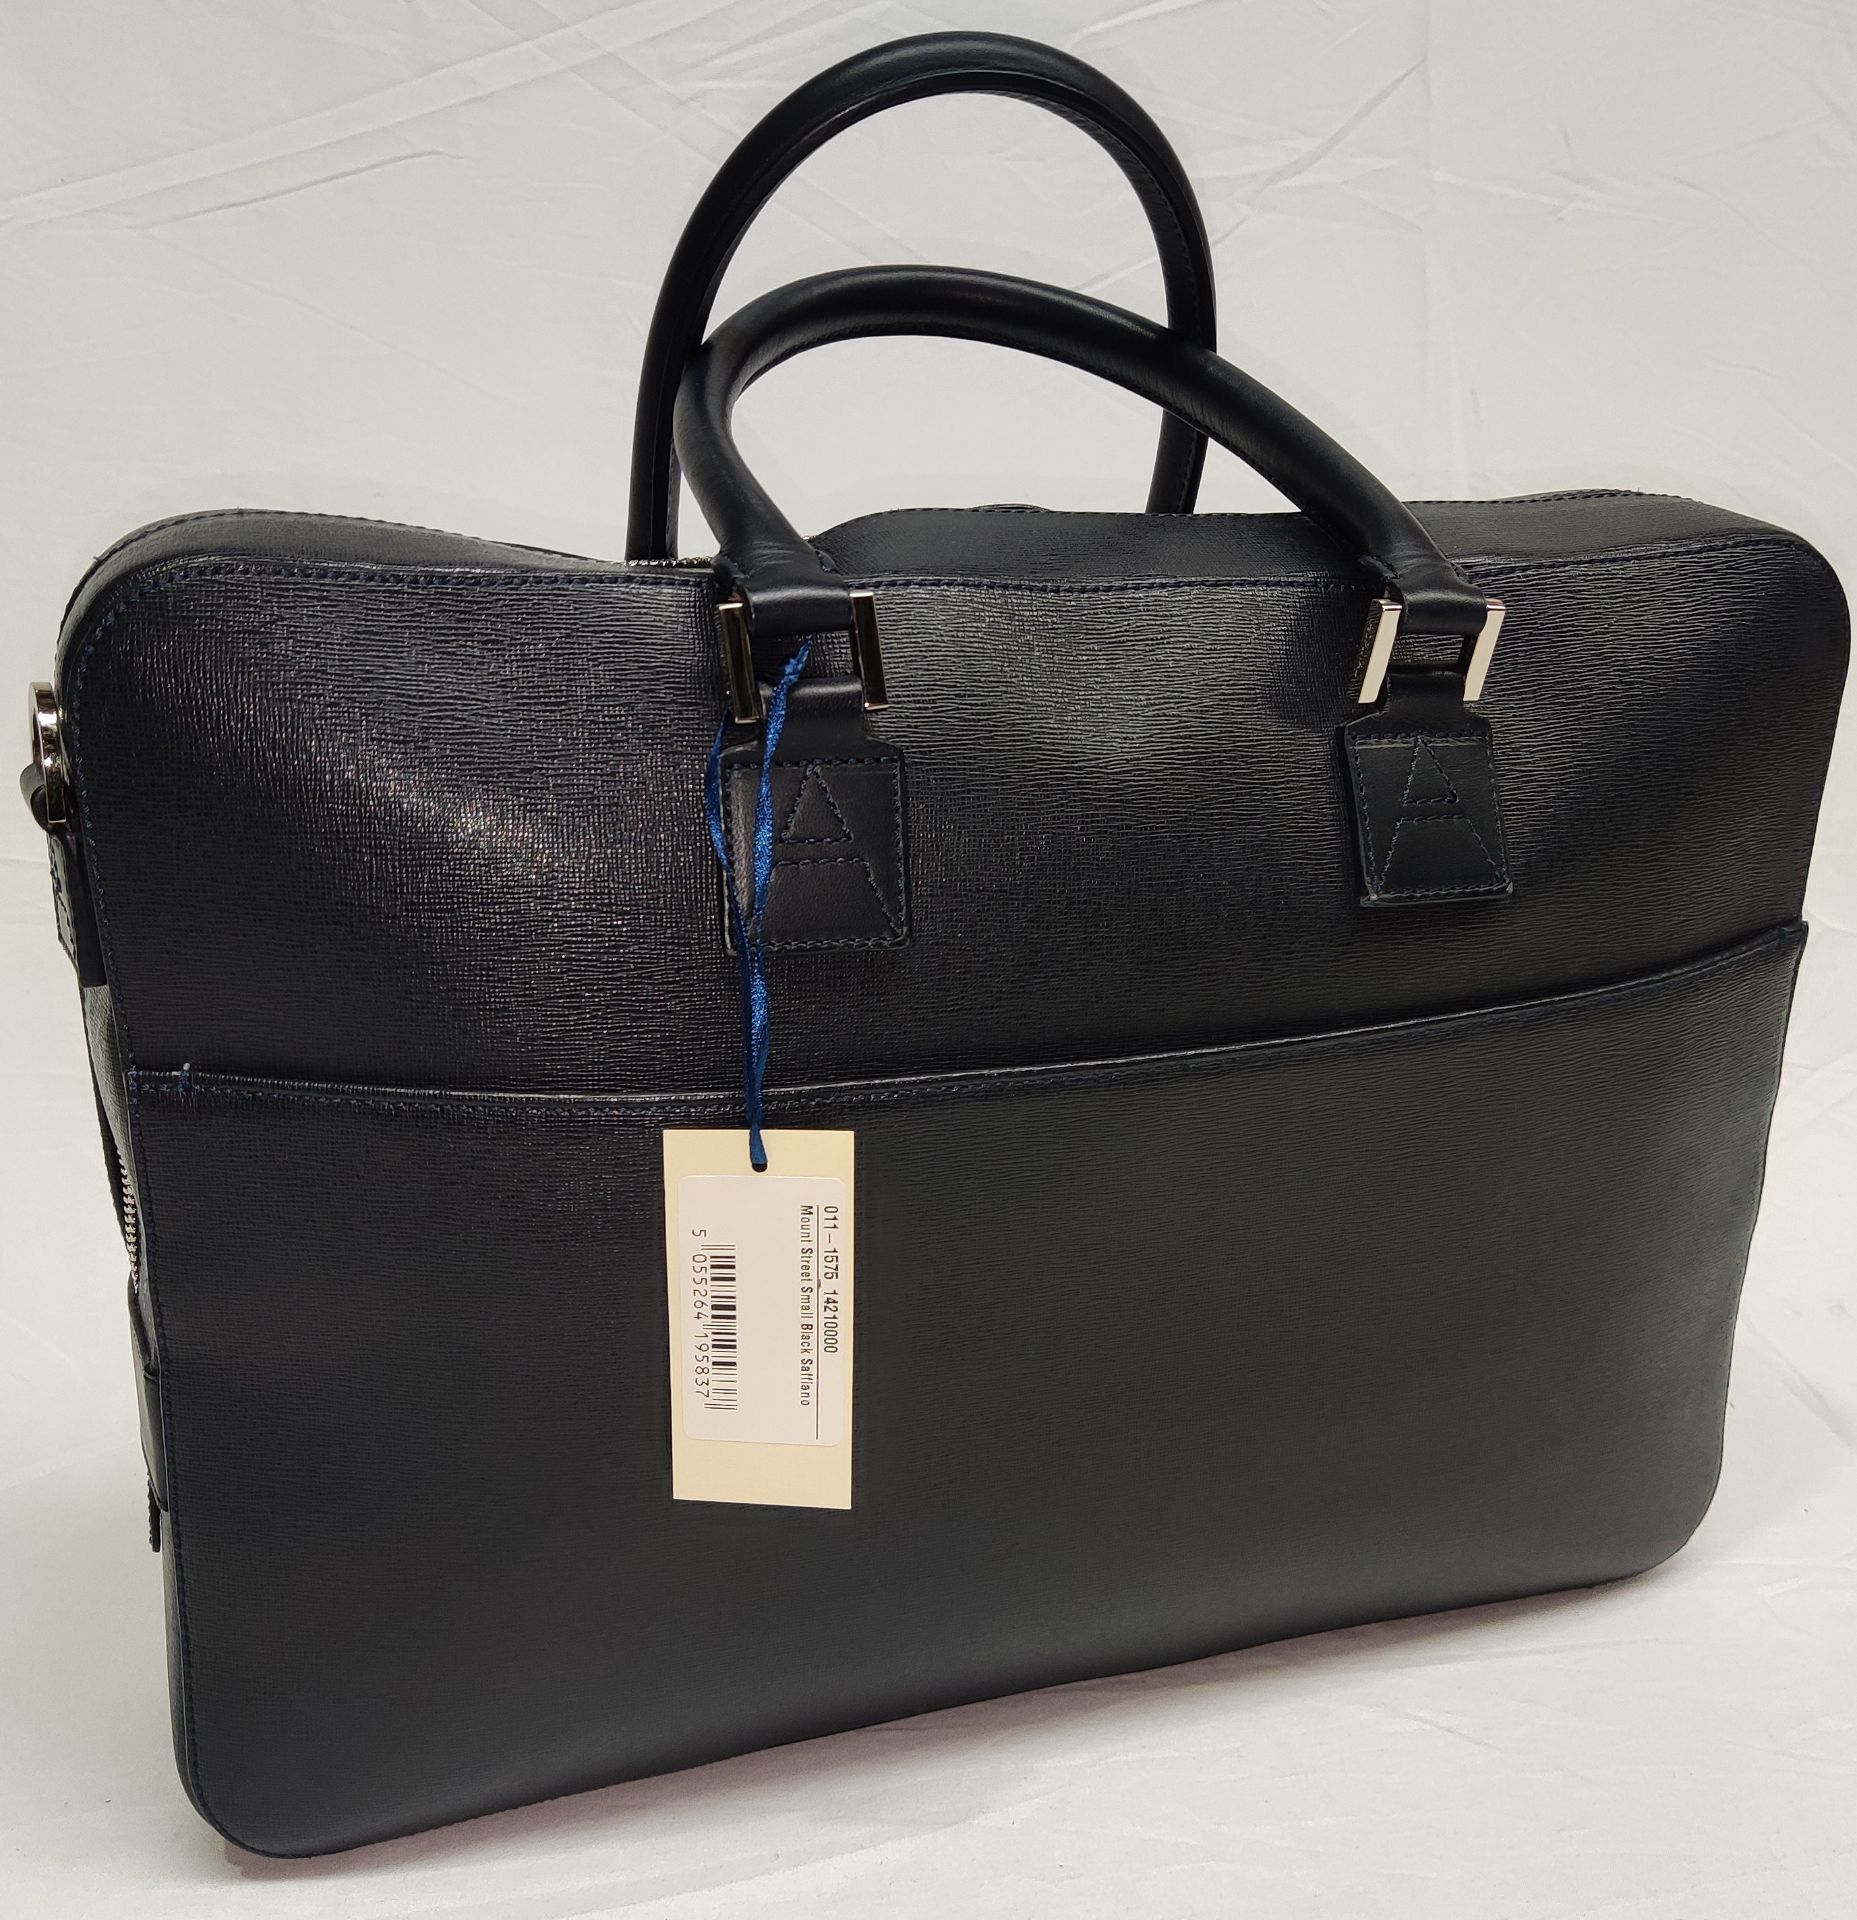 1 x ASPINAL OF LONDON Mount Street Small Laptop Bag In Black Saffiano - Original RRP £650.00 - Image 21 of 21